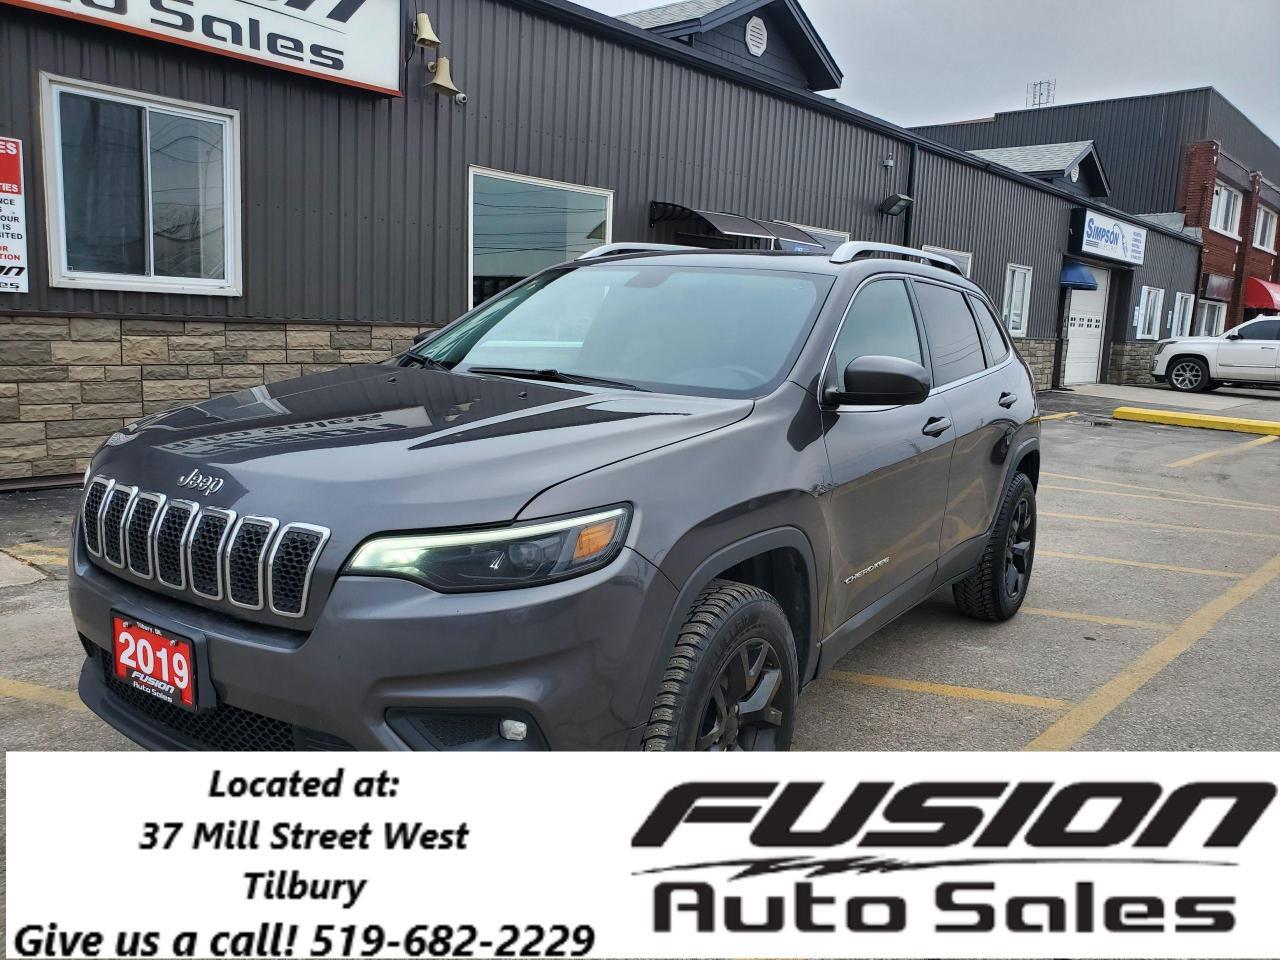 2019 Jeep Cherokee NORTH 4X4-NO HST TO A MAX OF $2000 LTD TIME ONLY